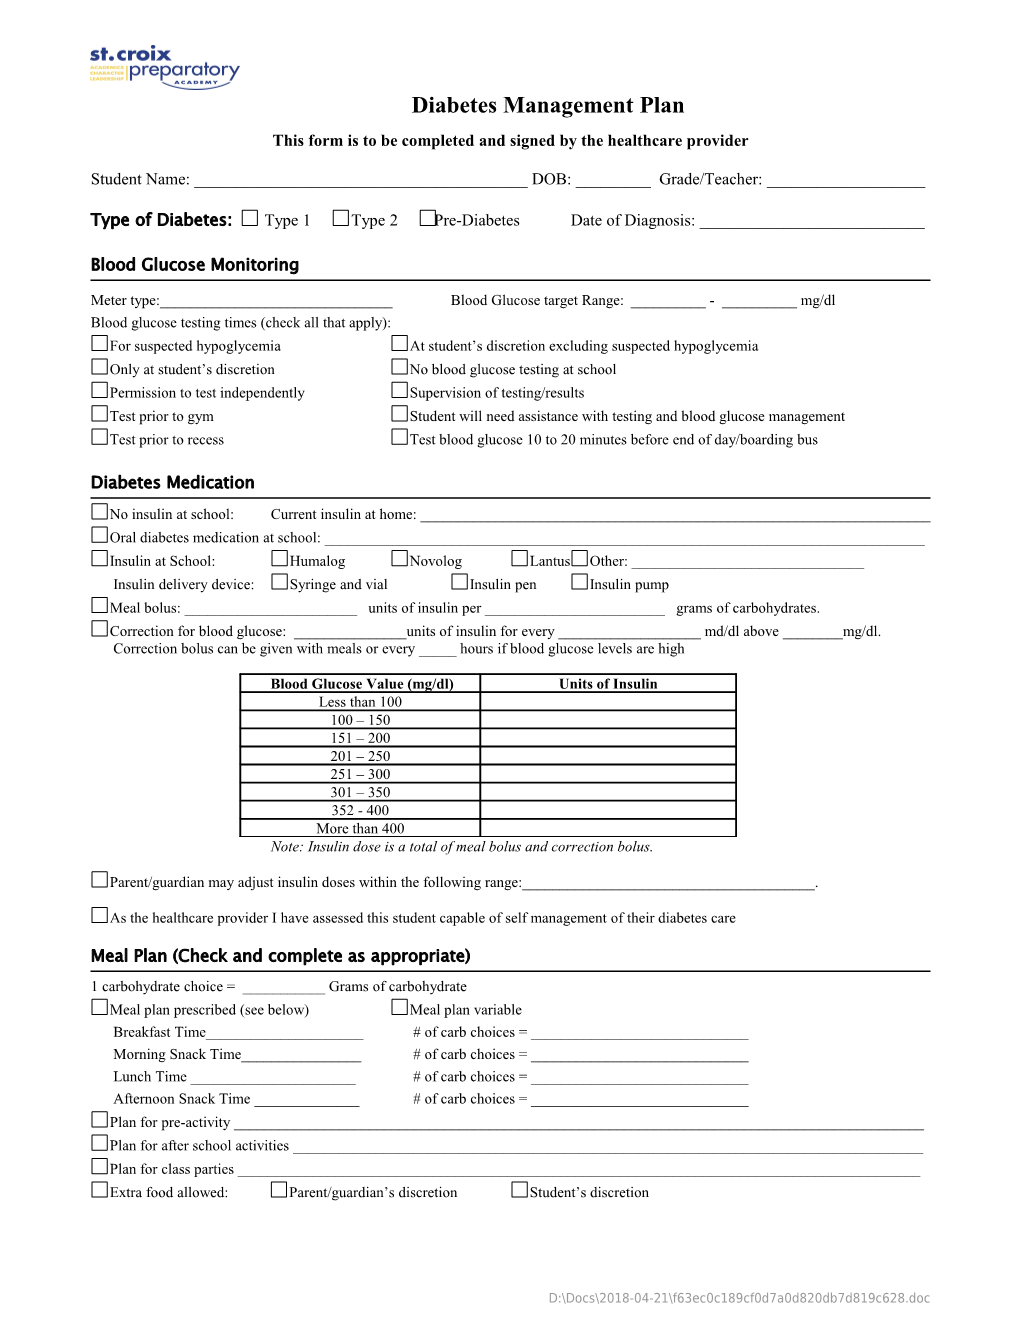 This Form Is to Be Completed and Signed by the Healthcare Provider